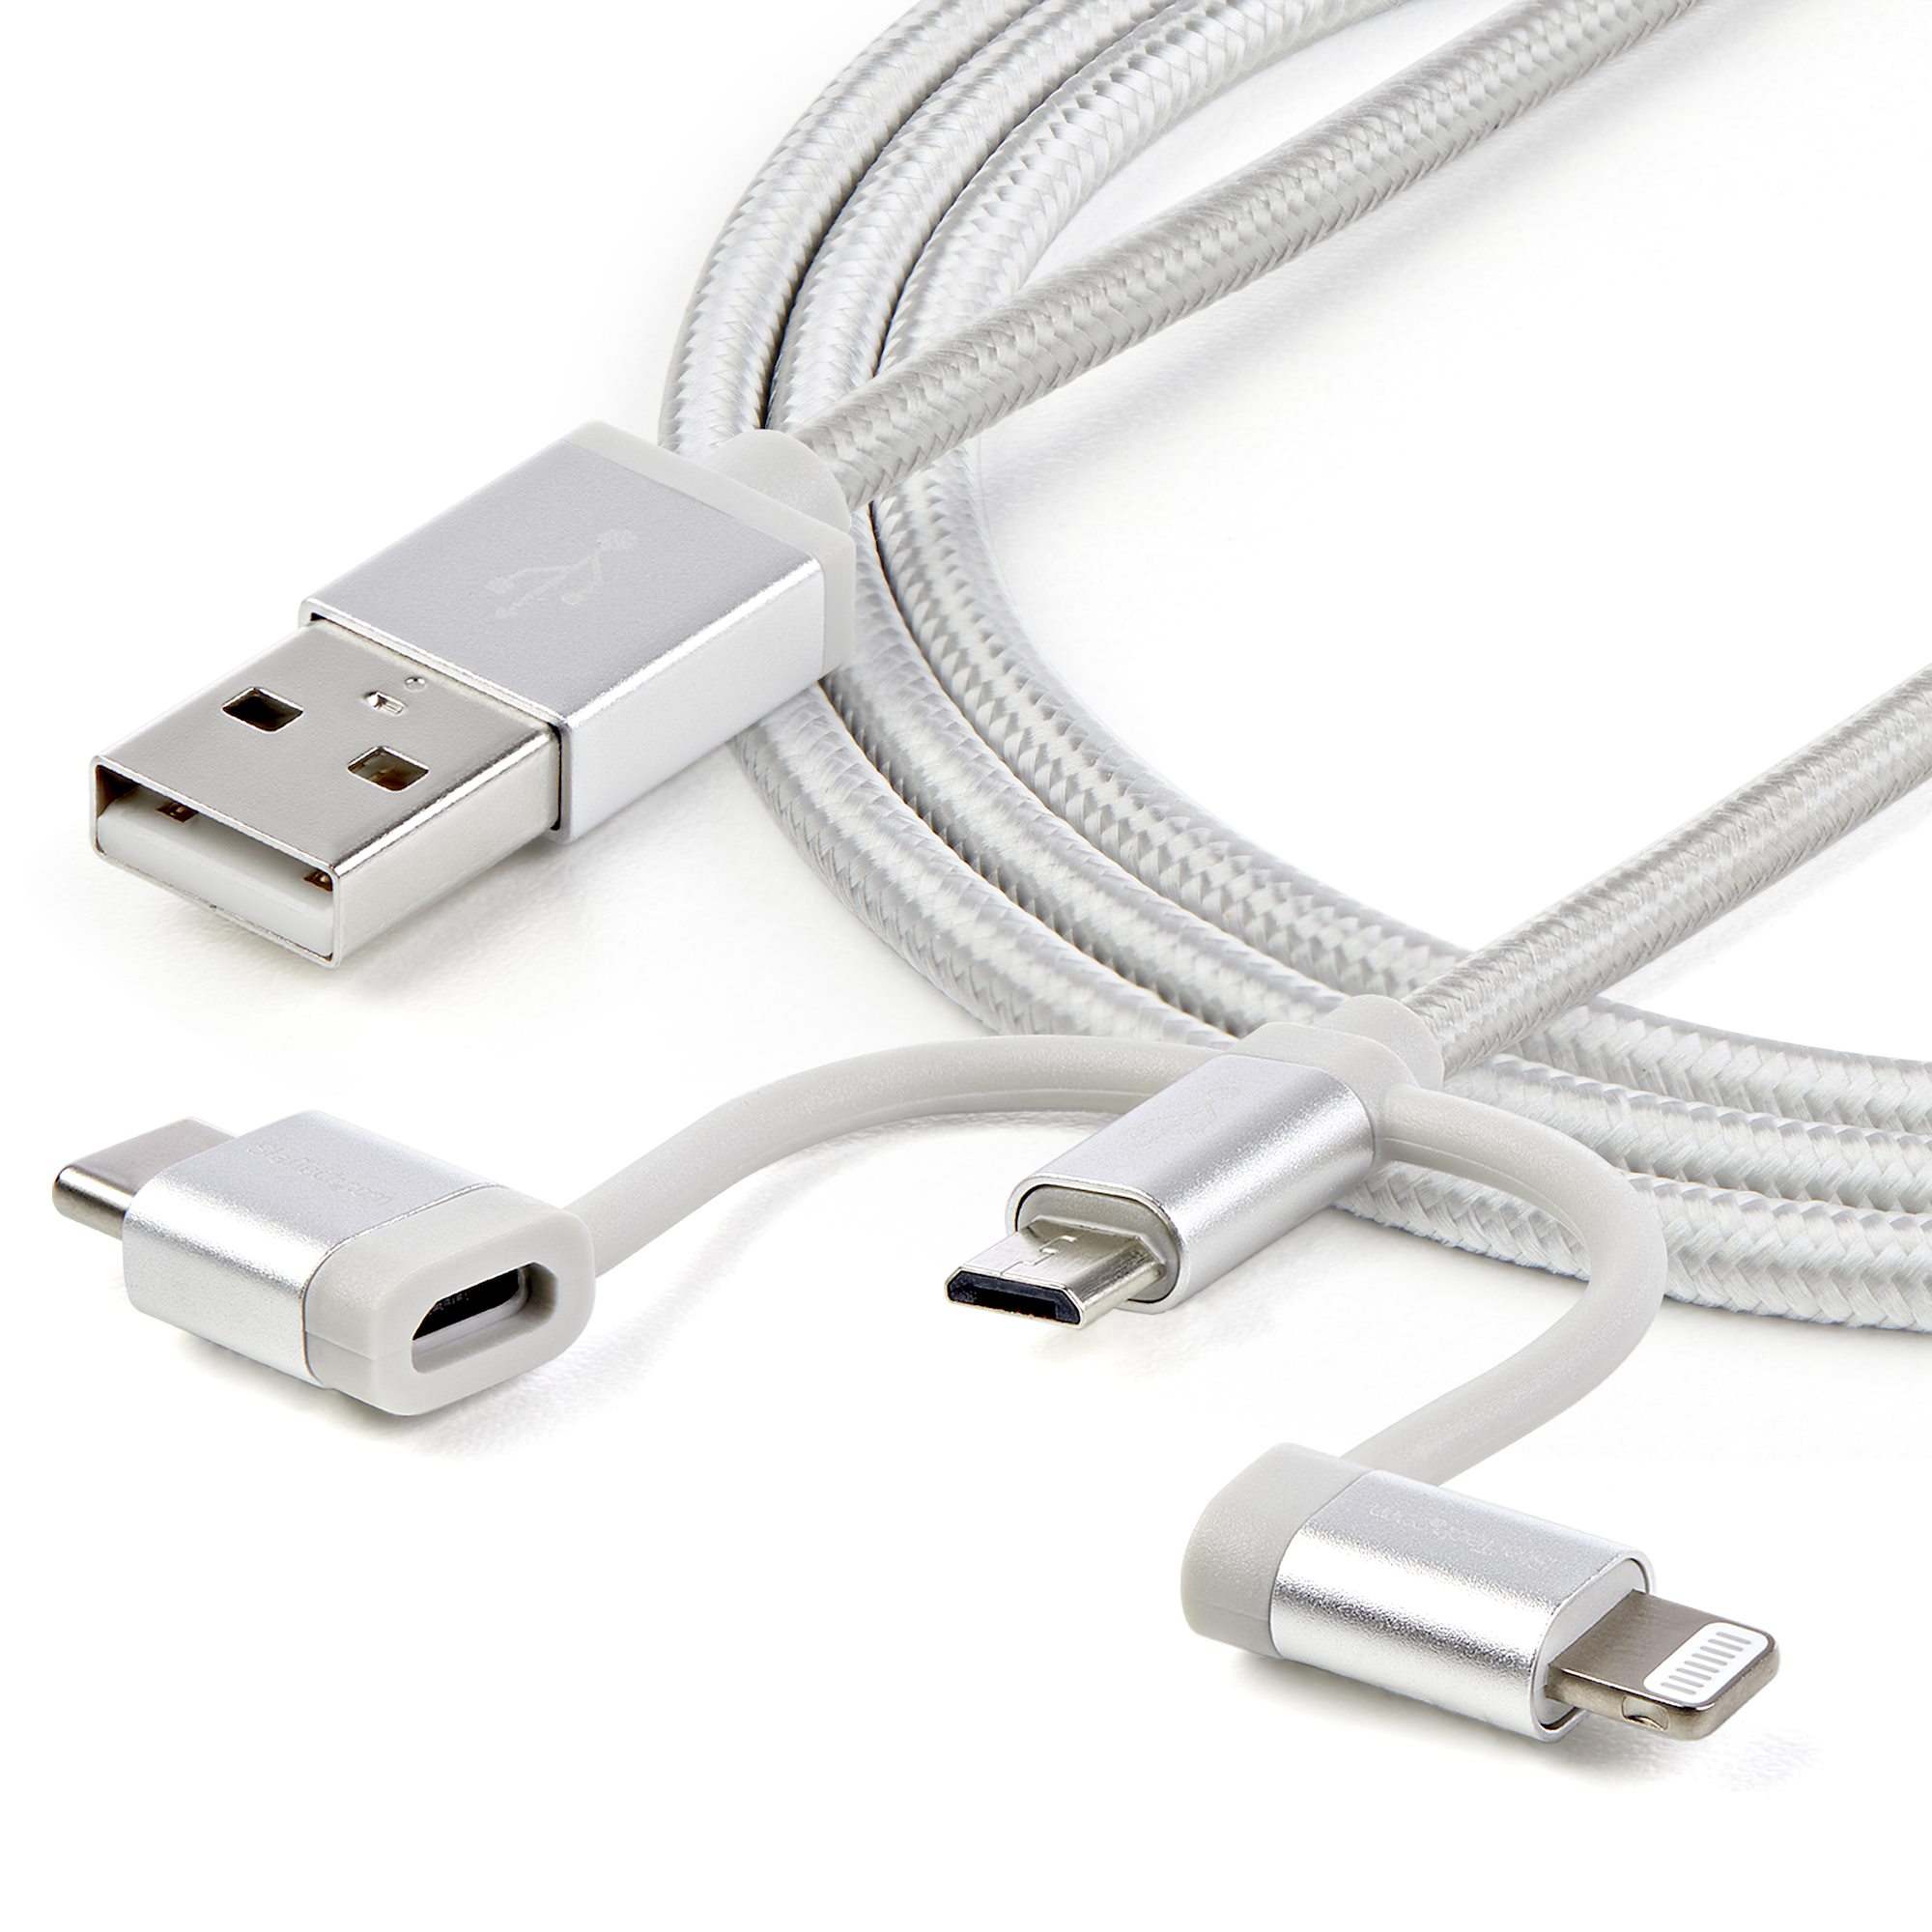 Cable 3w1 1m USB - Micro USB + Lightning + USB-C Denmen D05E white, all  GSM accessories \ Cables \ 2in1, 3in1, 4in1